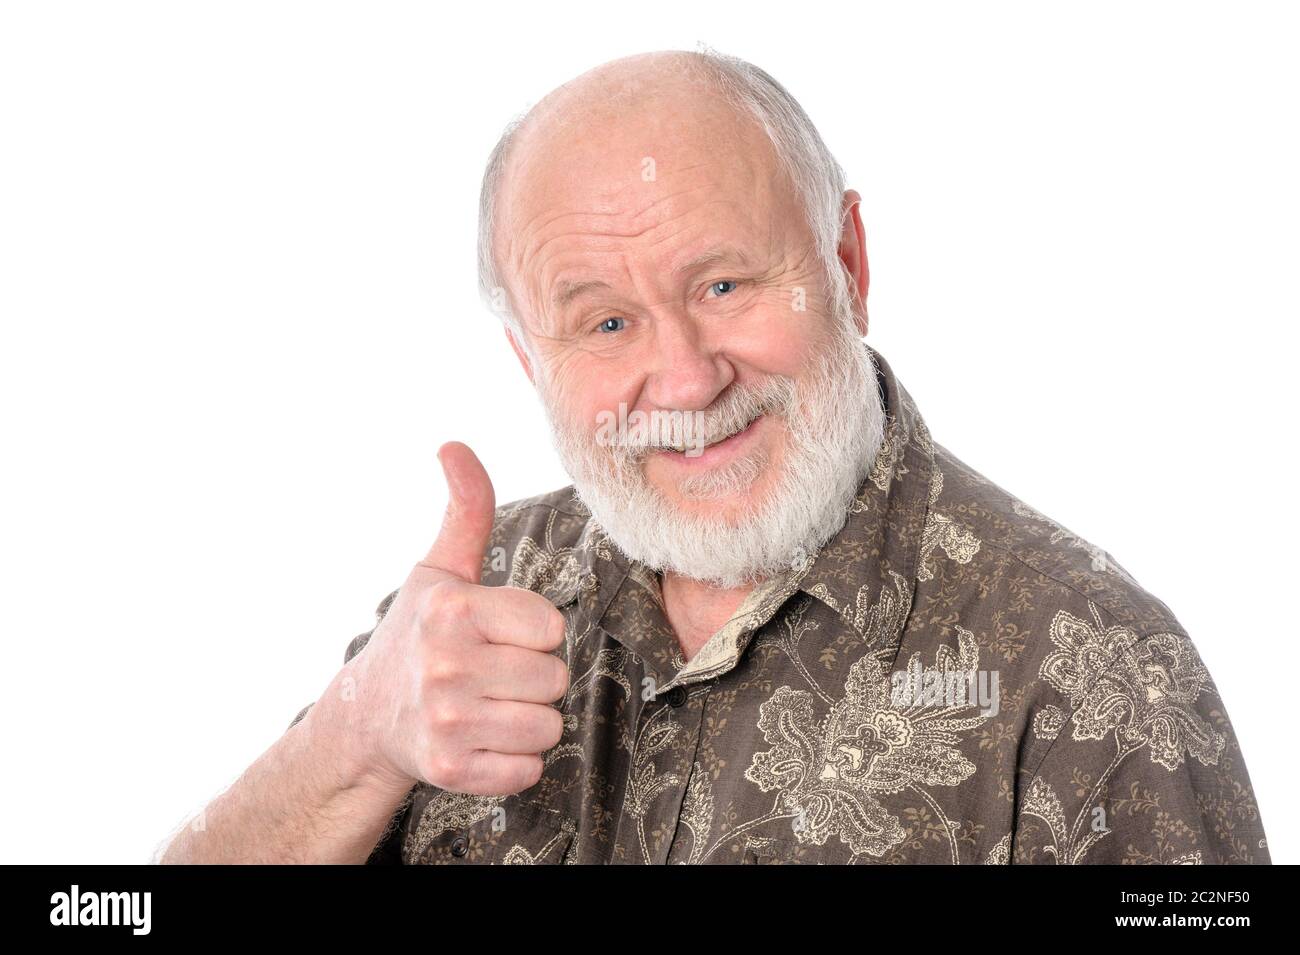 Senior man shows thumbs up gesture, isolated on white Stock Photo